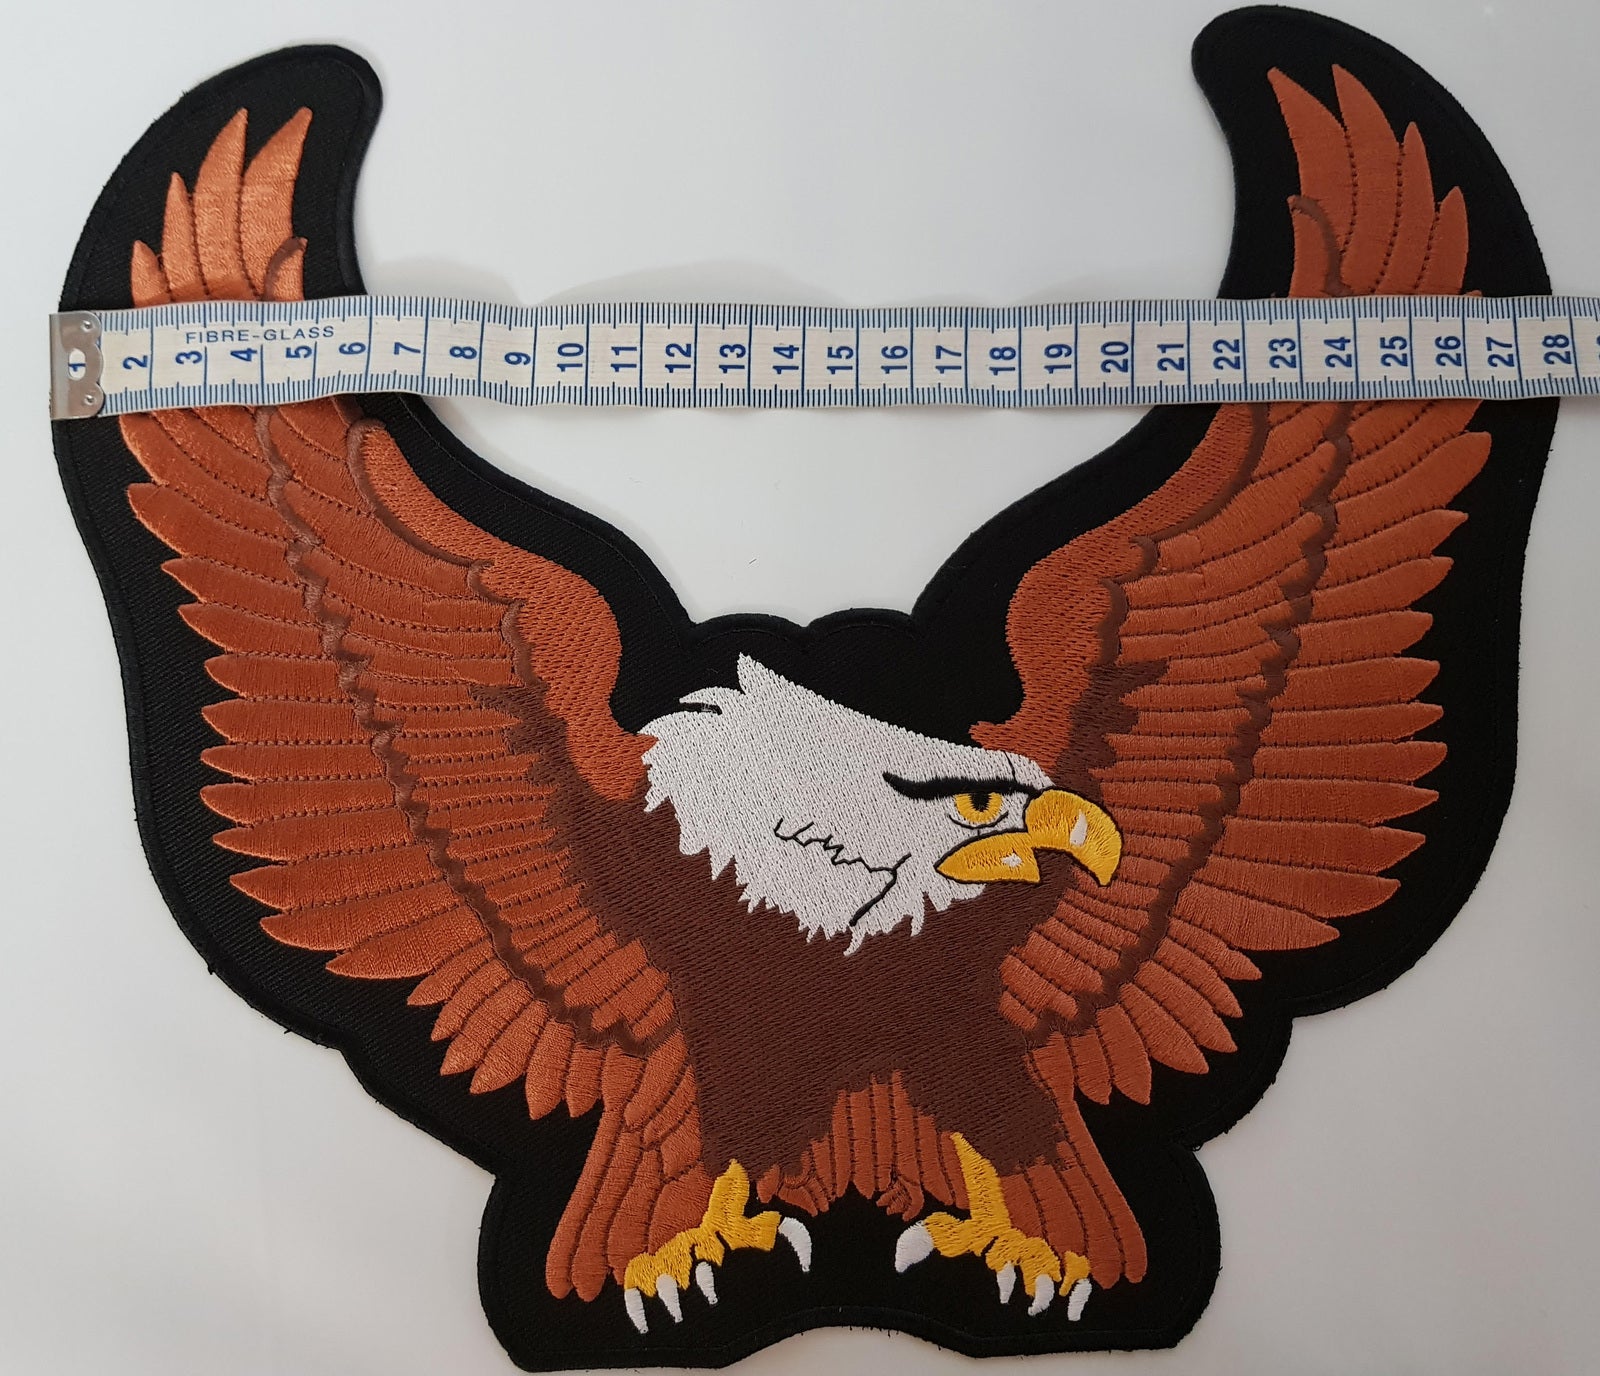 BGA Golden Eagle Motorcycle Patch